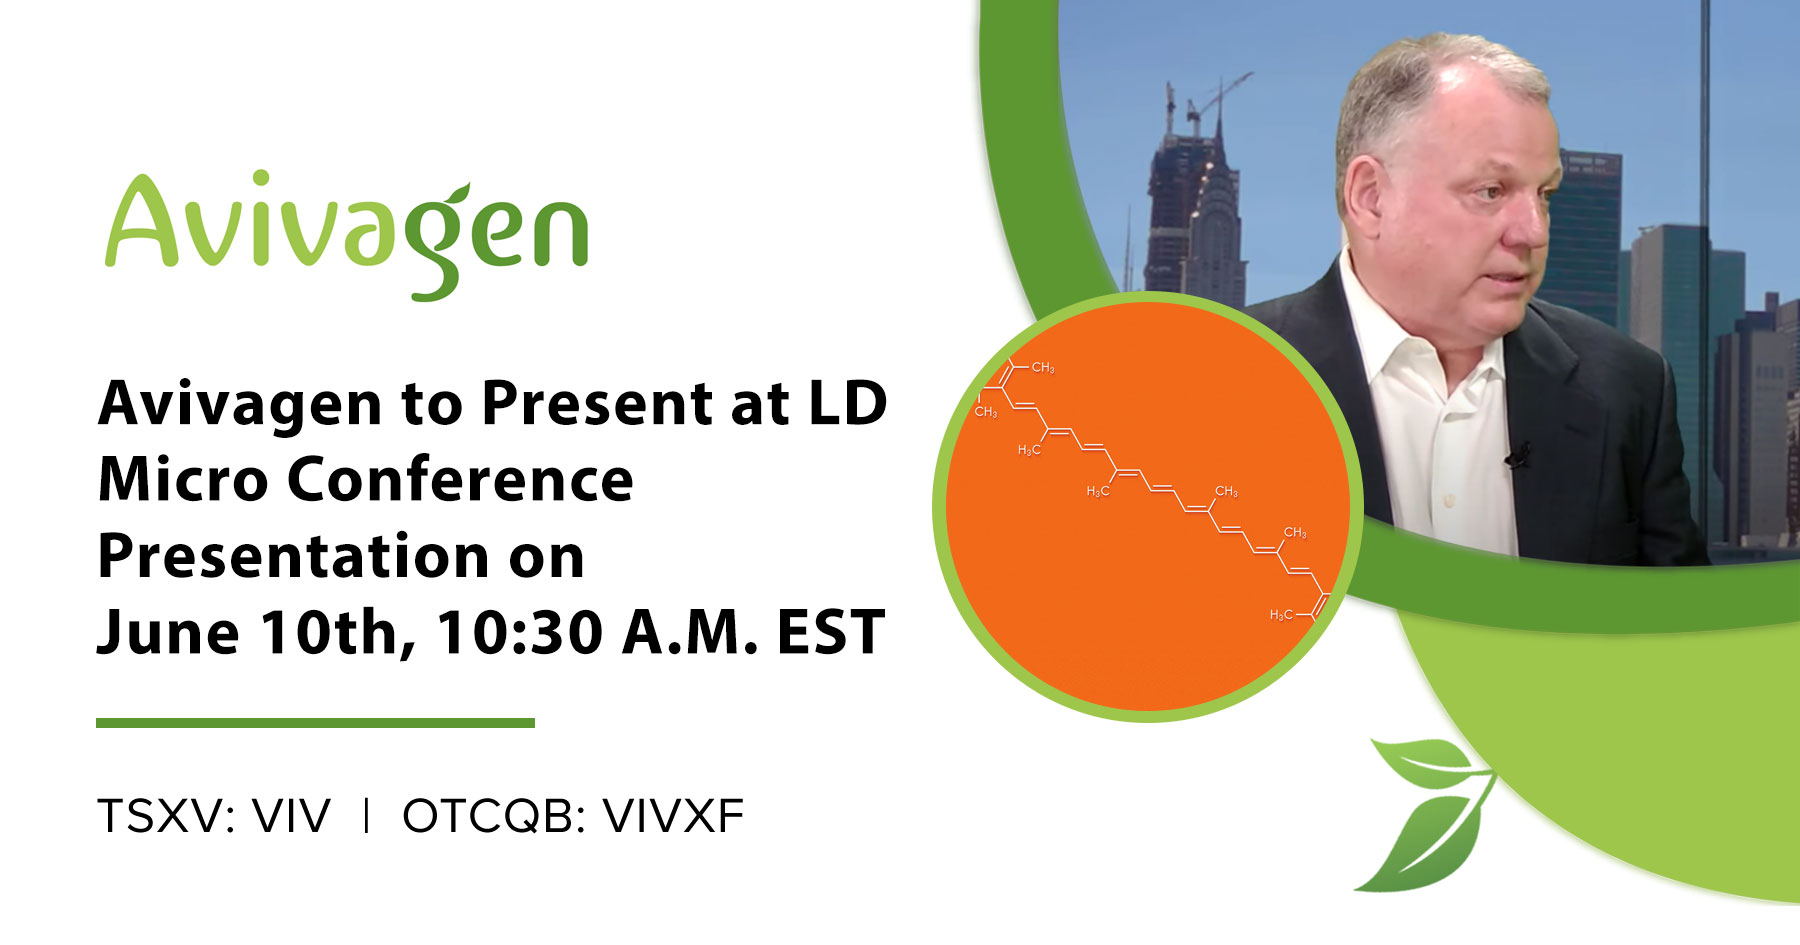 Avivagen to Present at LD Micro Conference Presentation on June 10th